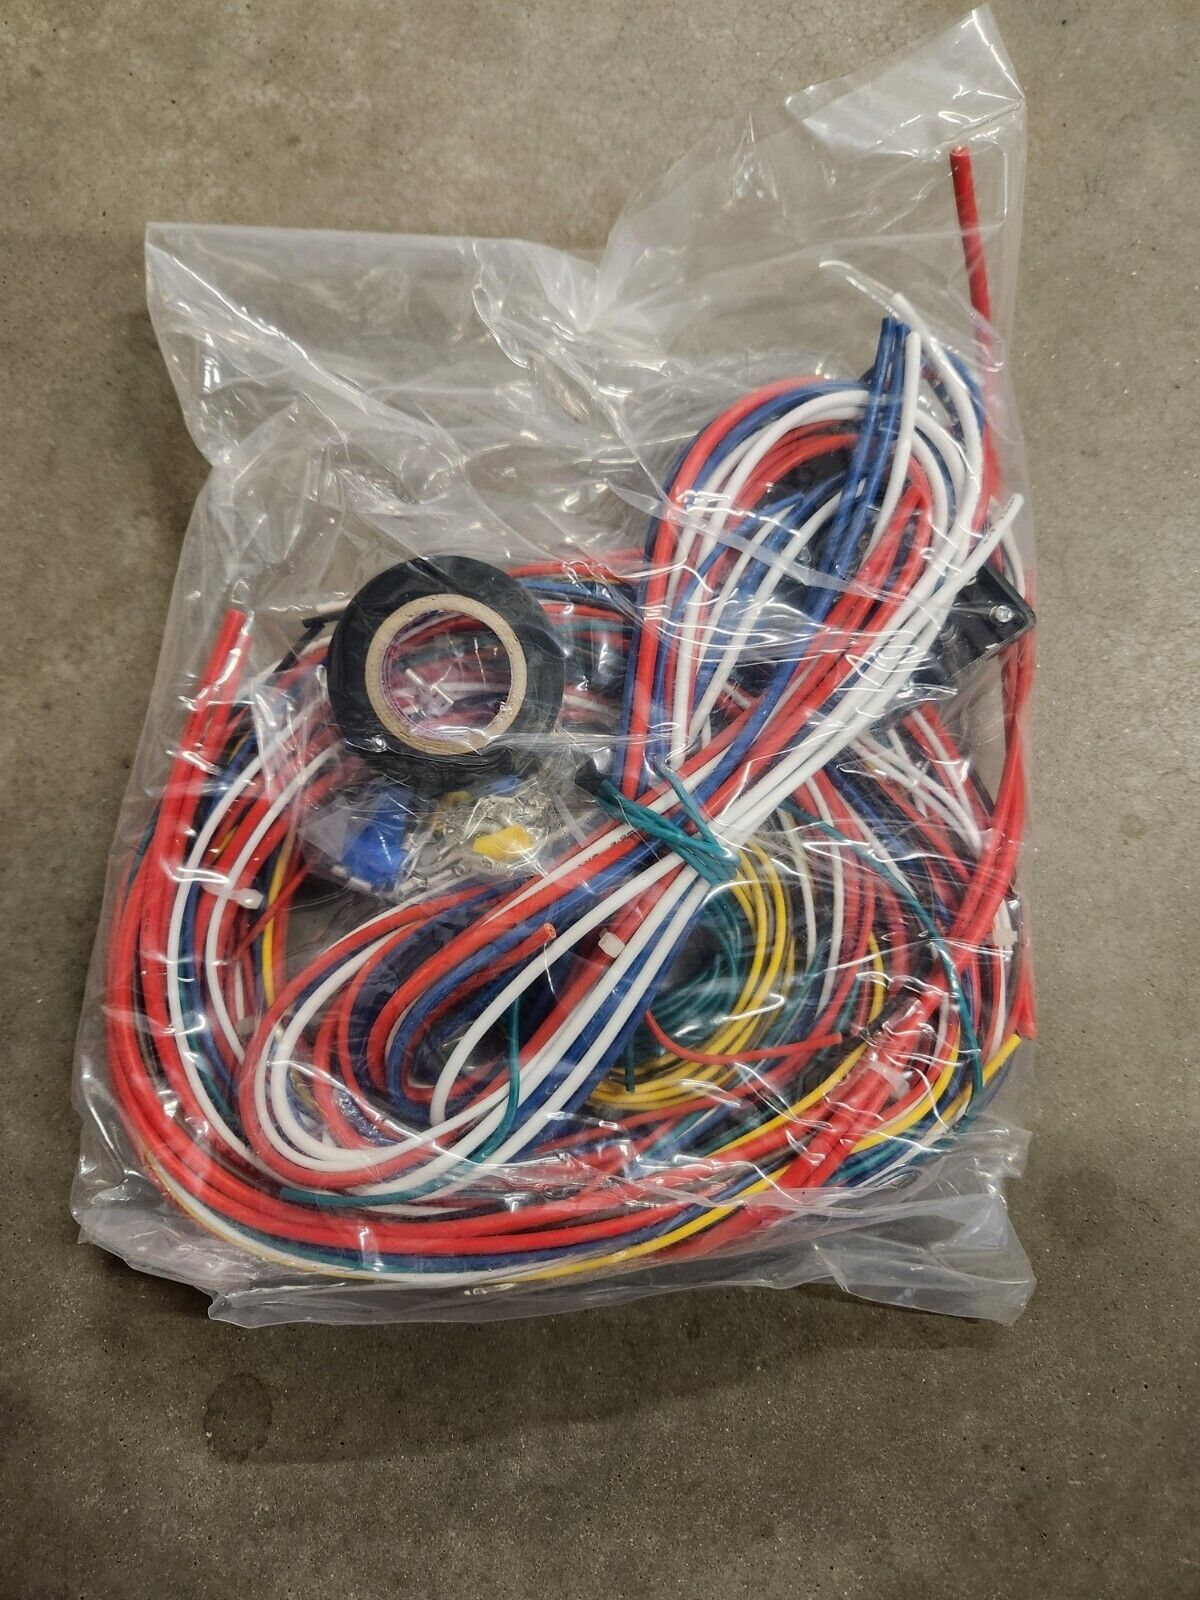 Dune Buggy Wiring Harness, Buggy Harness, Buggy Wiring